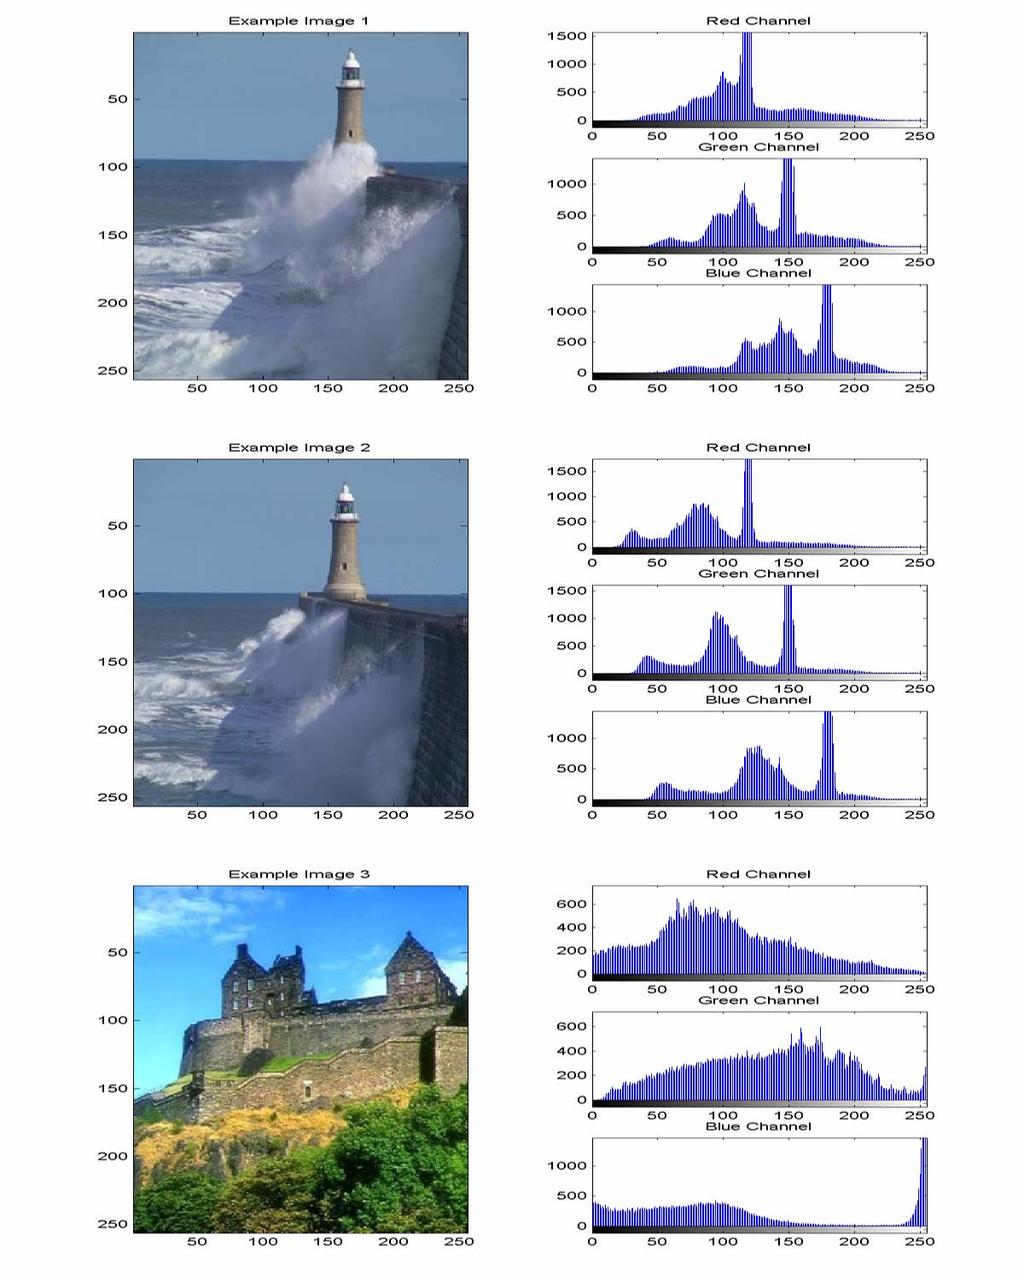 images with dissimilar content should have distinctly dissimilar histograms.